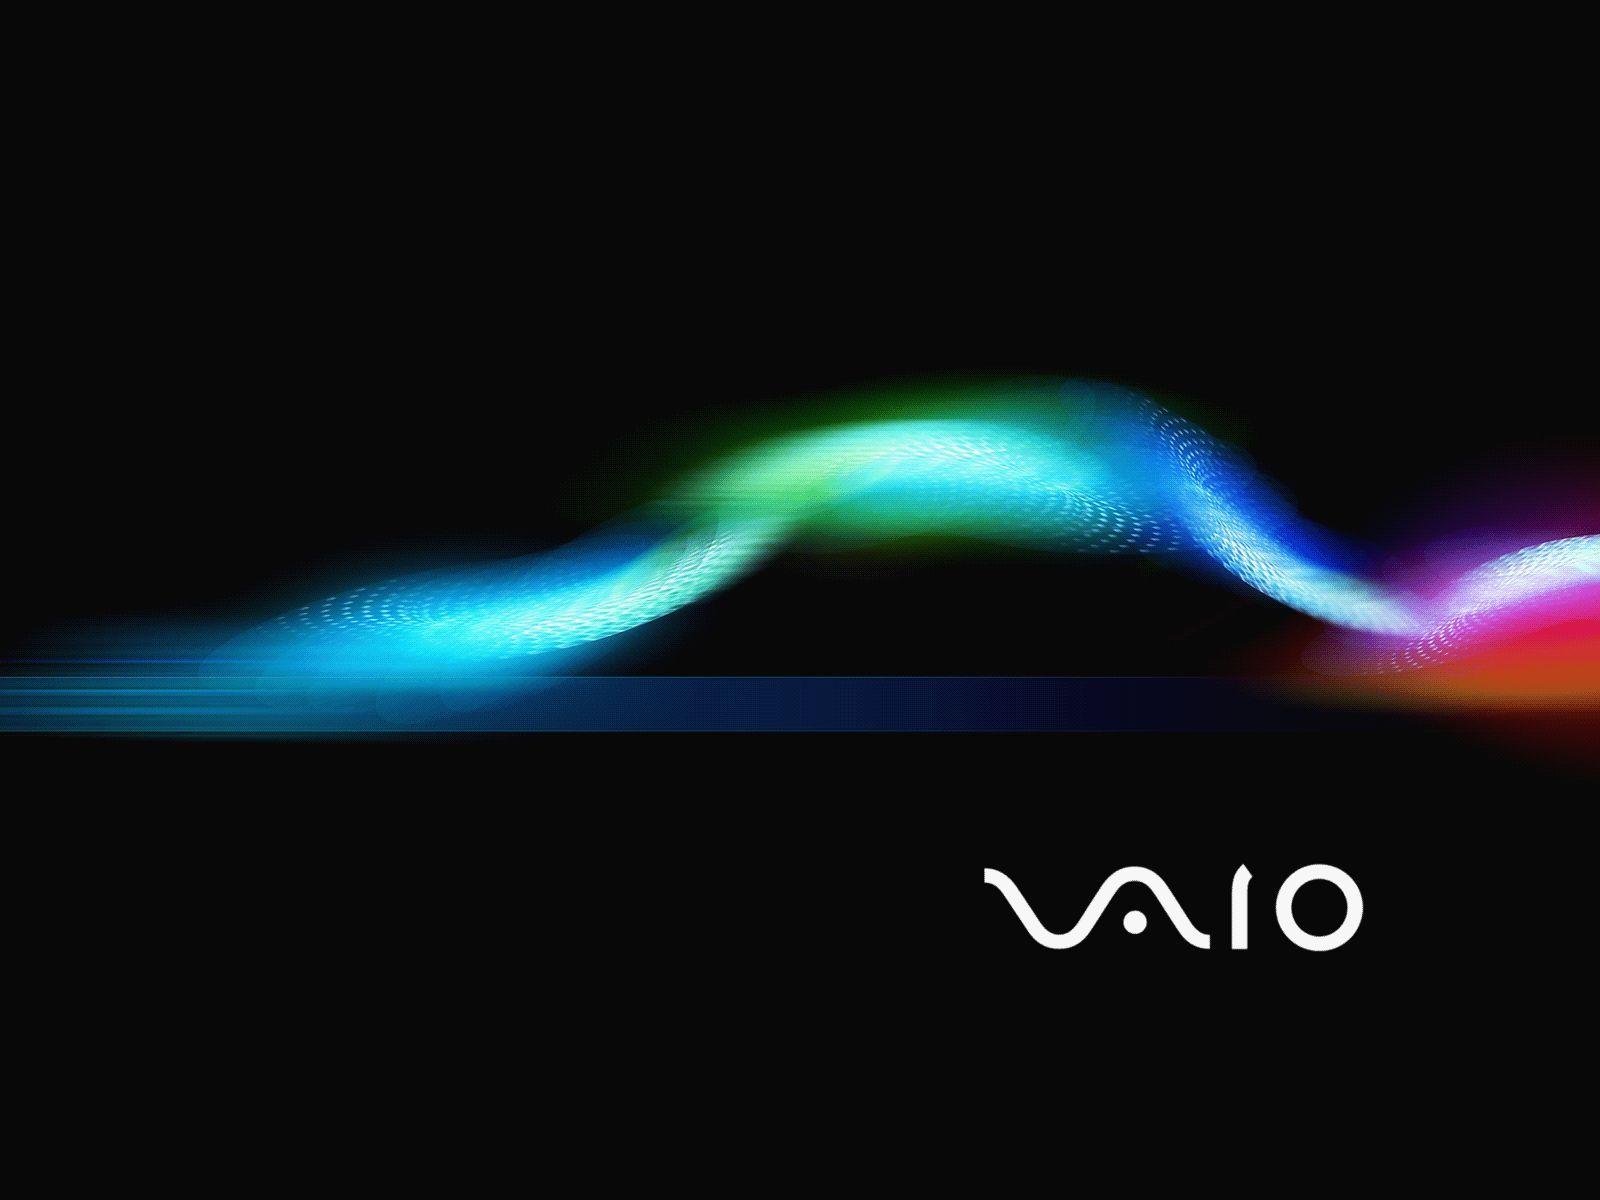 Sony Vaio 3d Wallpapers Top Free Sony Vaio 3d Backgrounds Wallpaperaccess